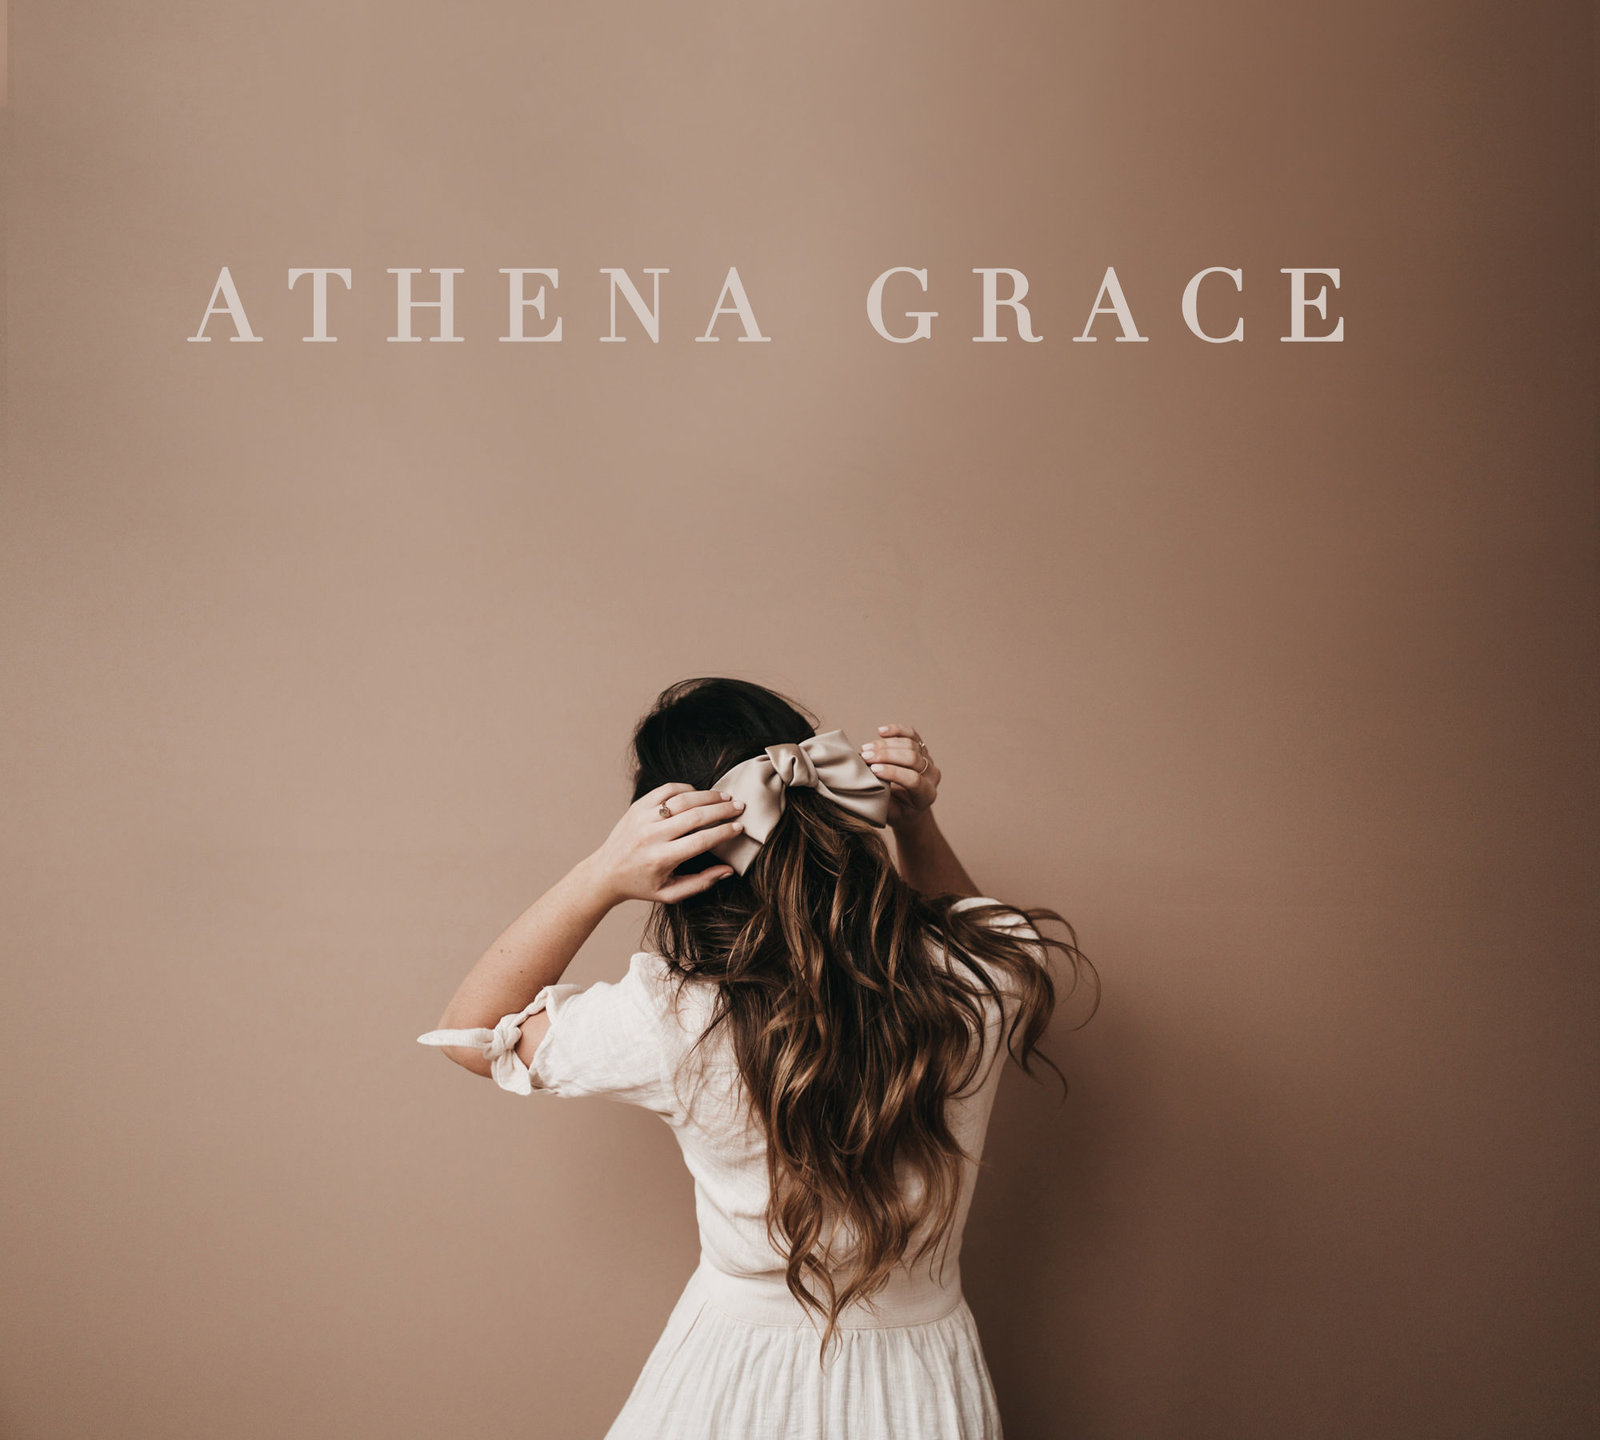 athena-grace-landing-page-coming-soon1